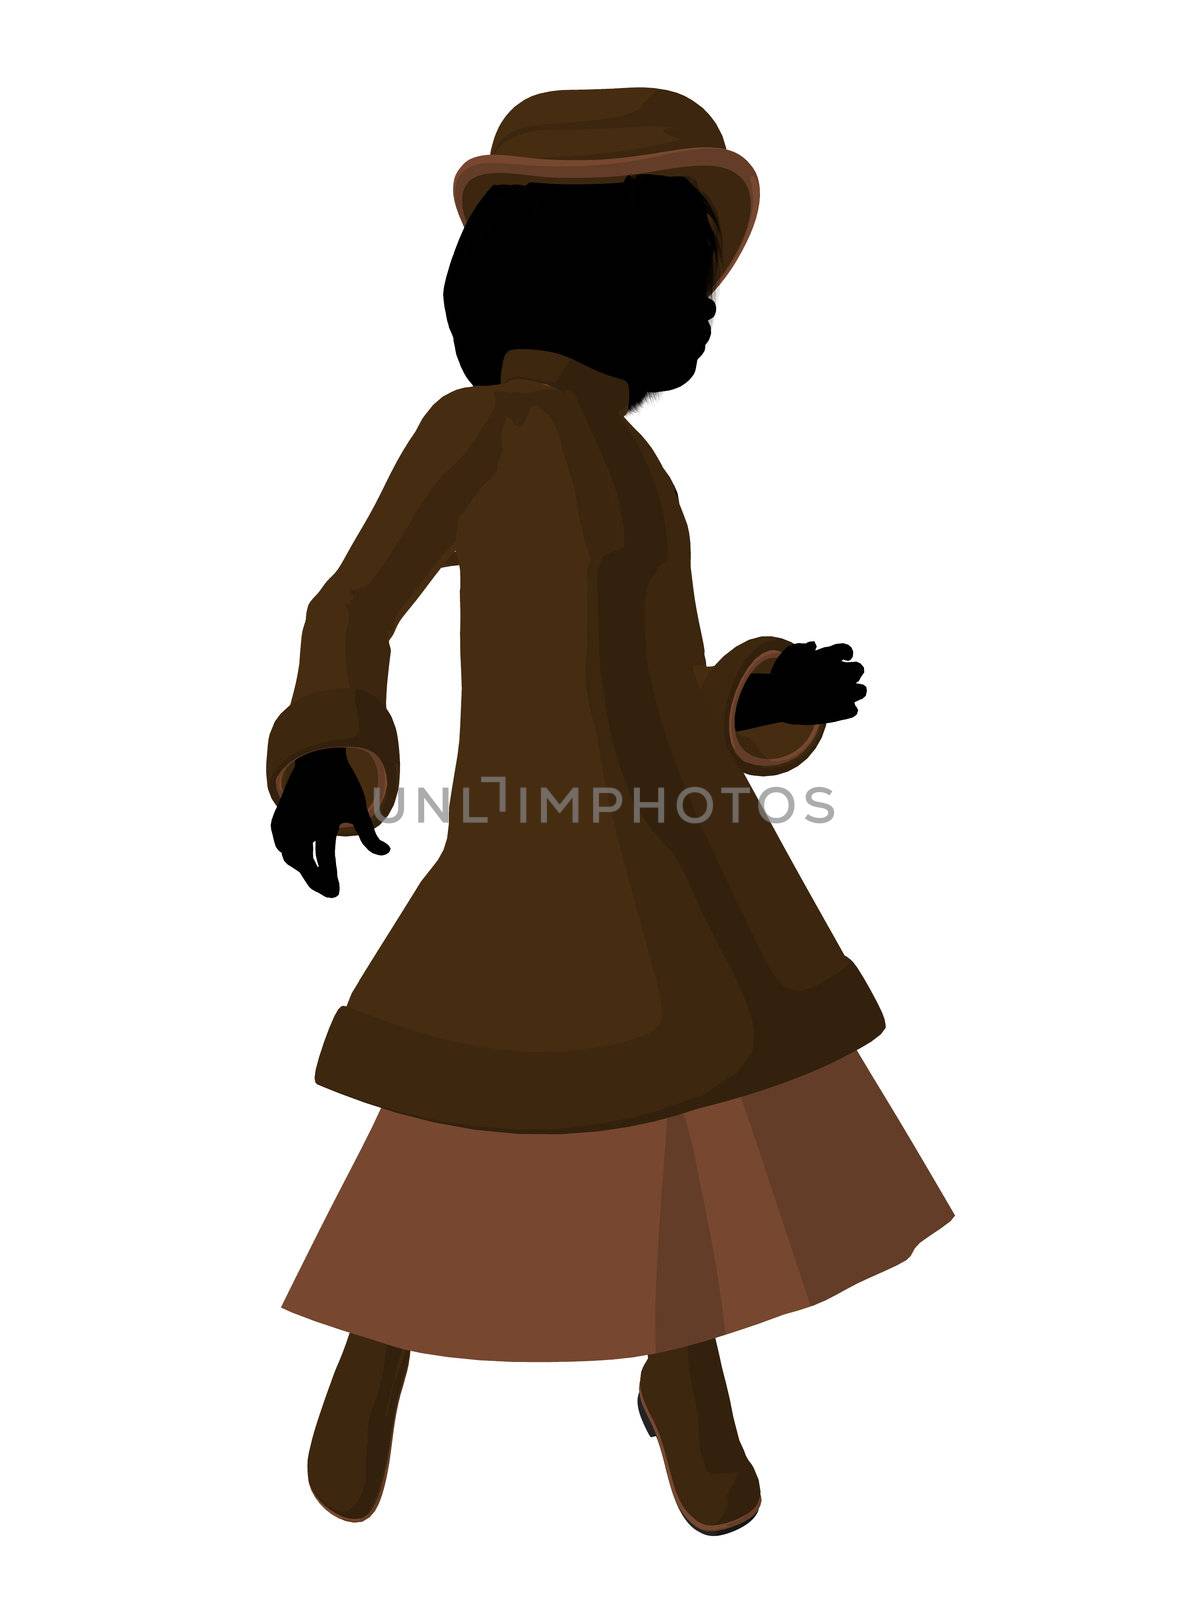 Victorian Girl Illustration Silhouette by kathygold